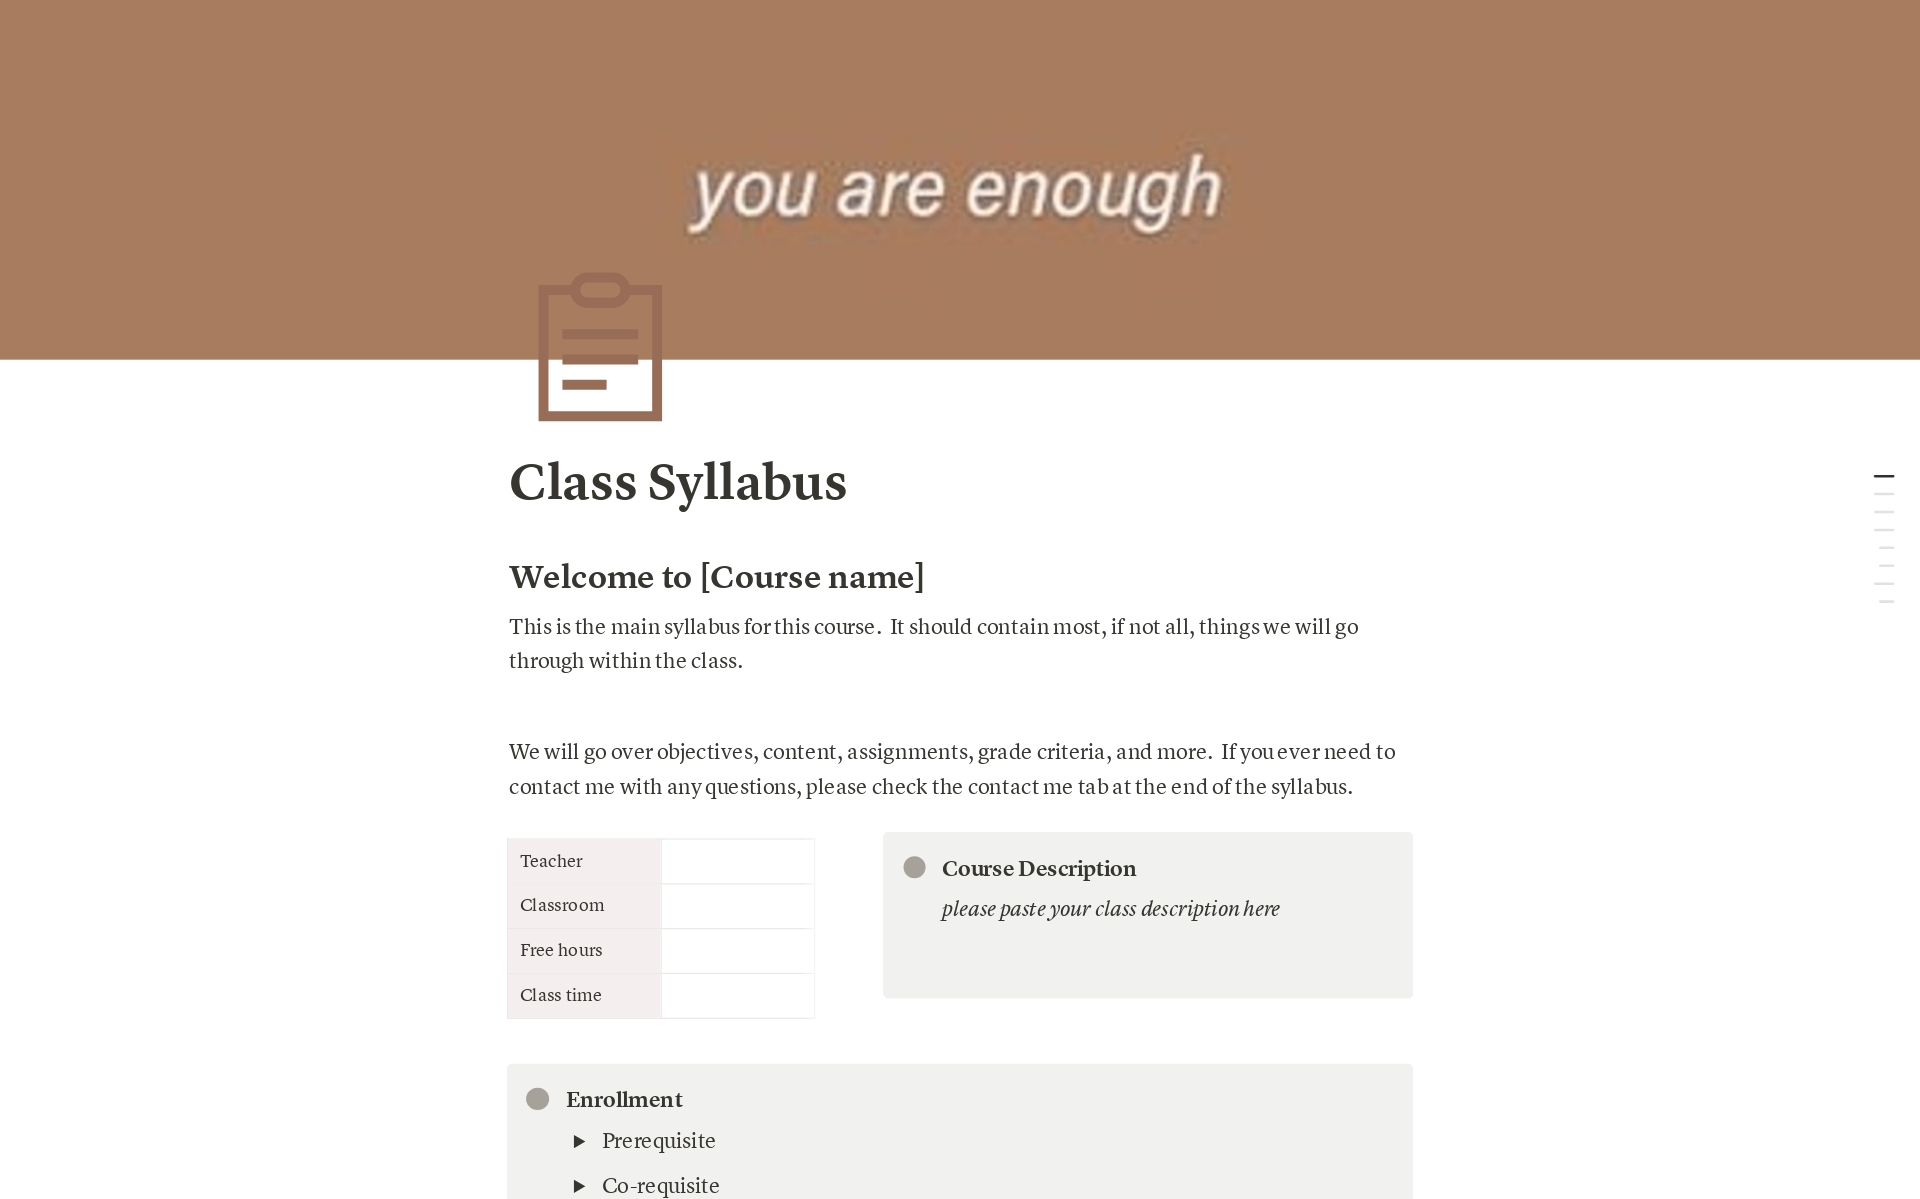 Streamline your course organization with our syllabus template. Clearly outline objectives, assignments, grading criteria, and policies for an organized and effective learning experience. Editable and adaptable to suit your course needs. Get started today!